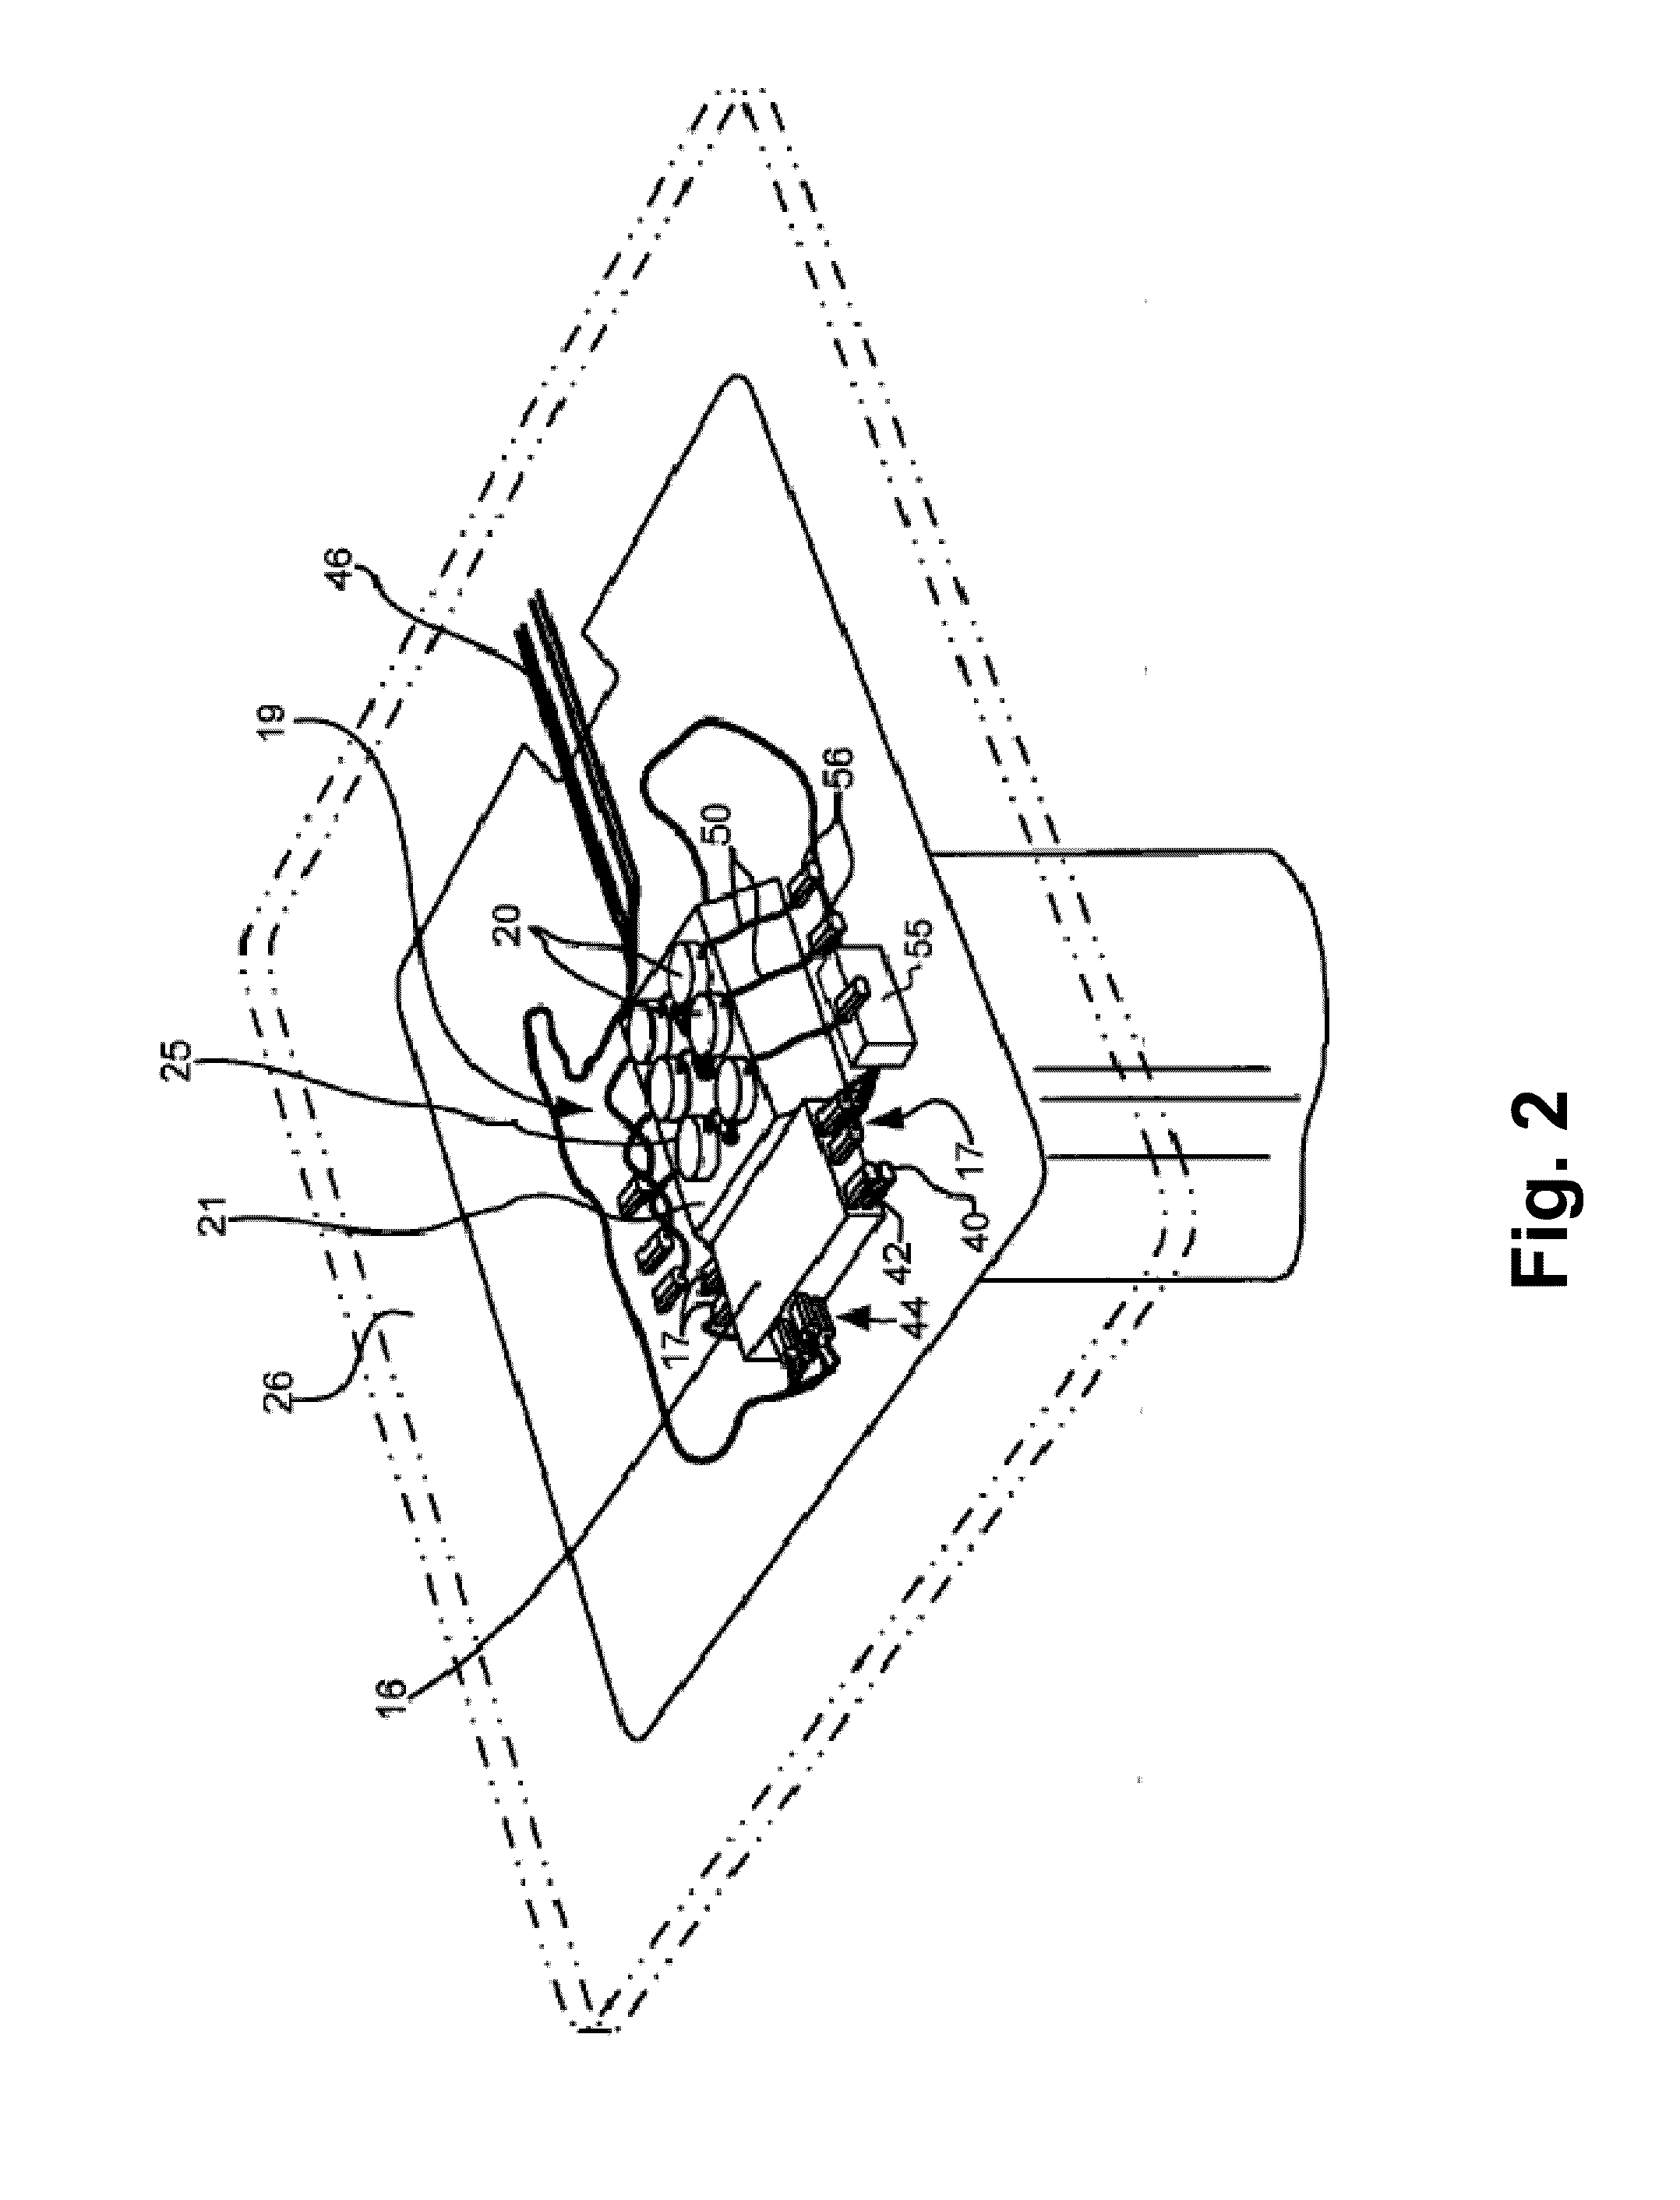 Control Apparatus and Method for Sharing Information in a Collaborative Workspace